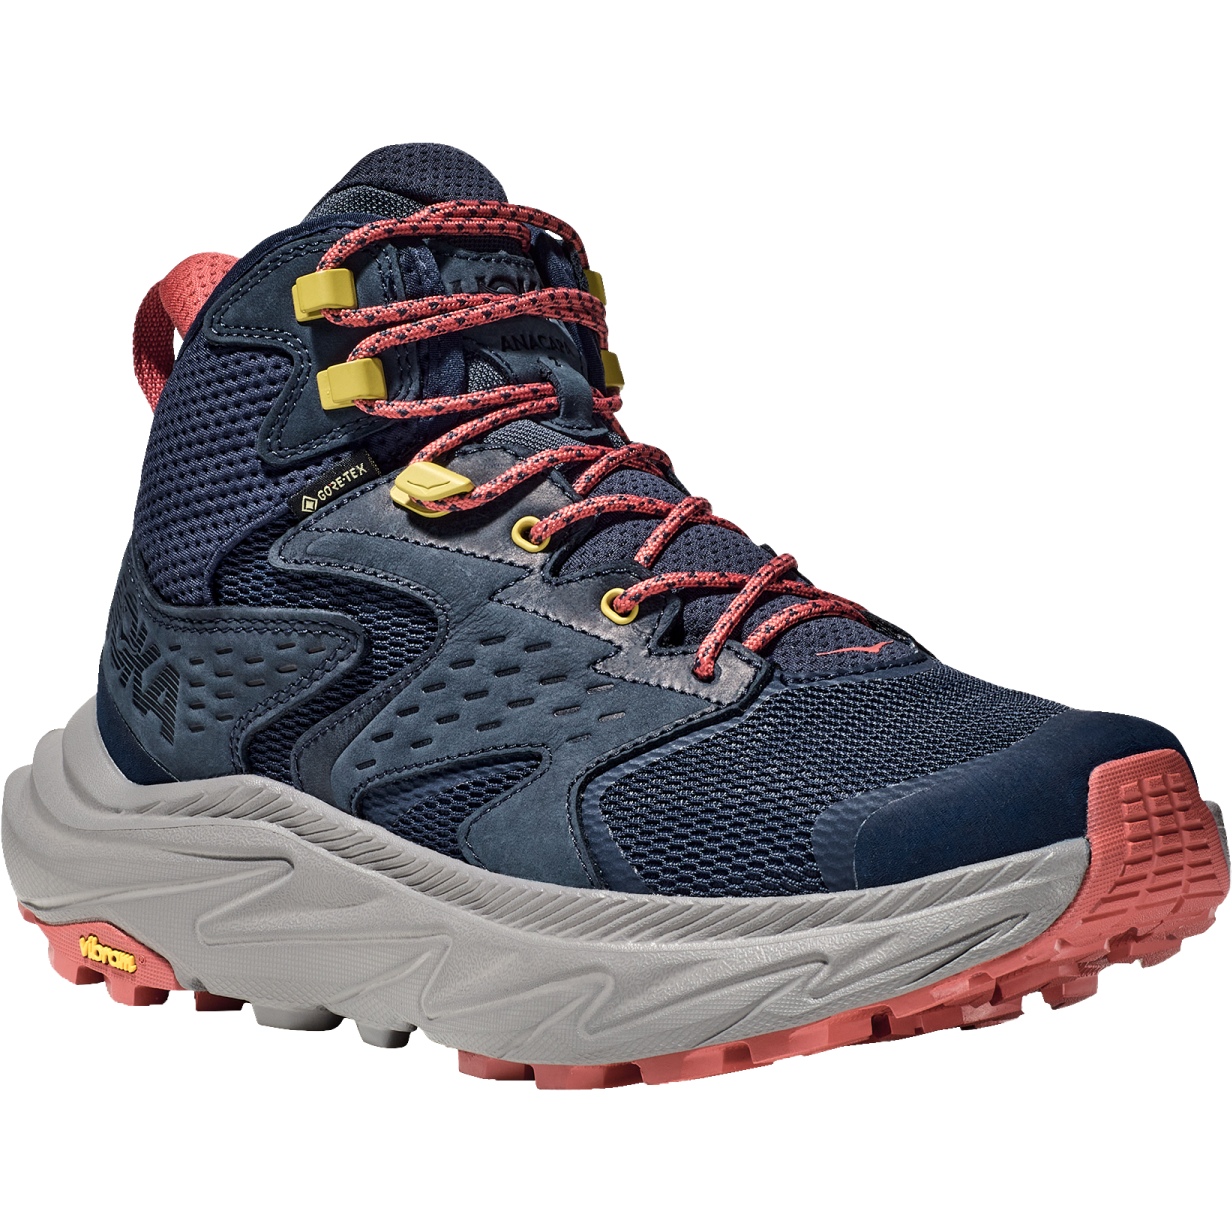 Picture of Hoka Anacapa 2 Mid GTX Hiking Shoes - outer space / grey